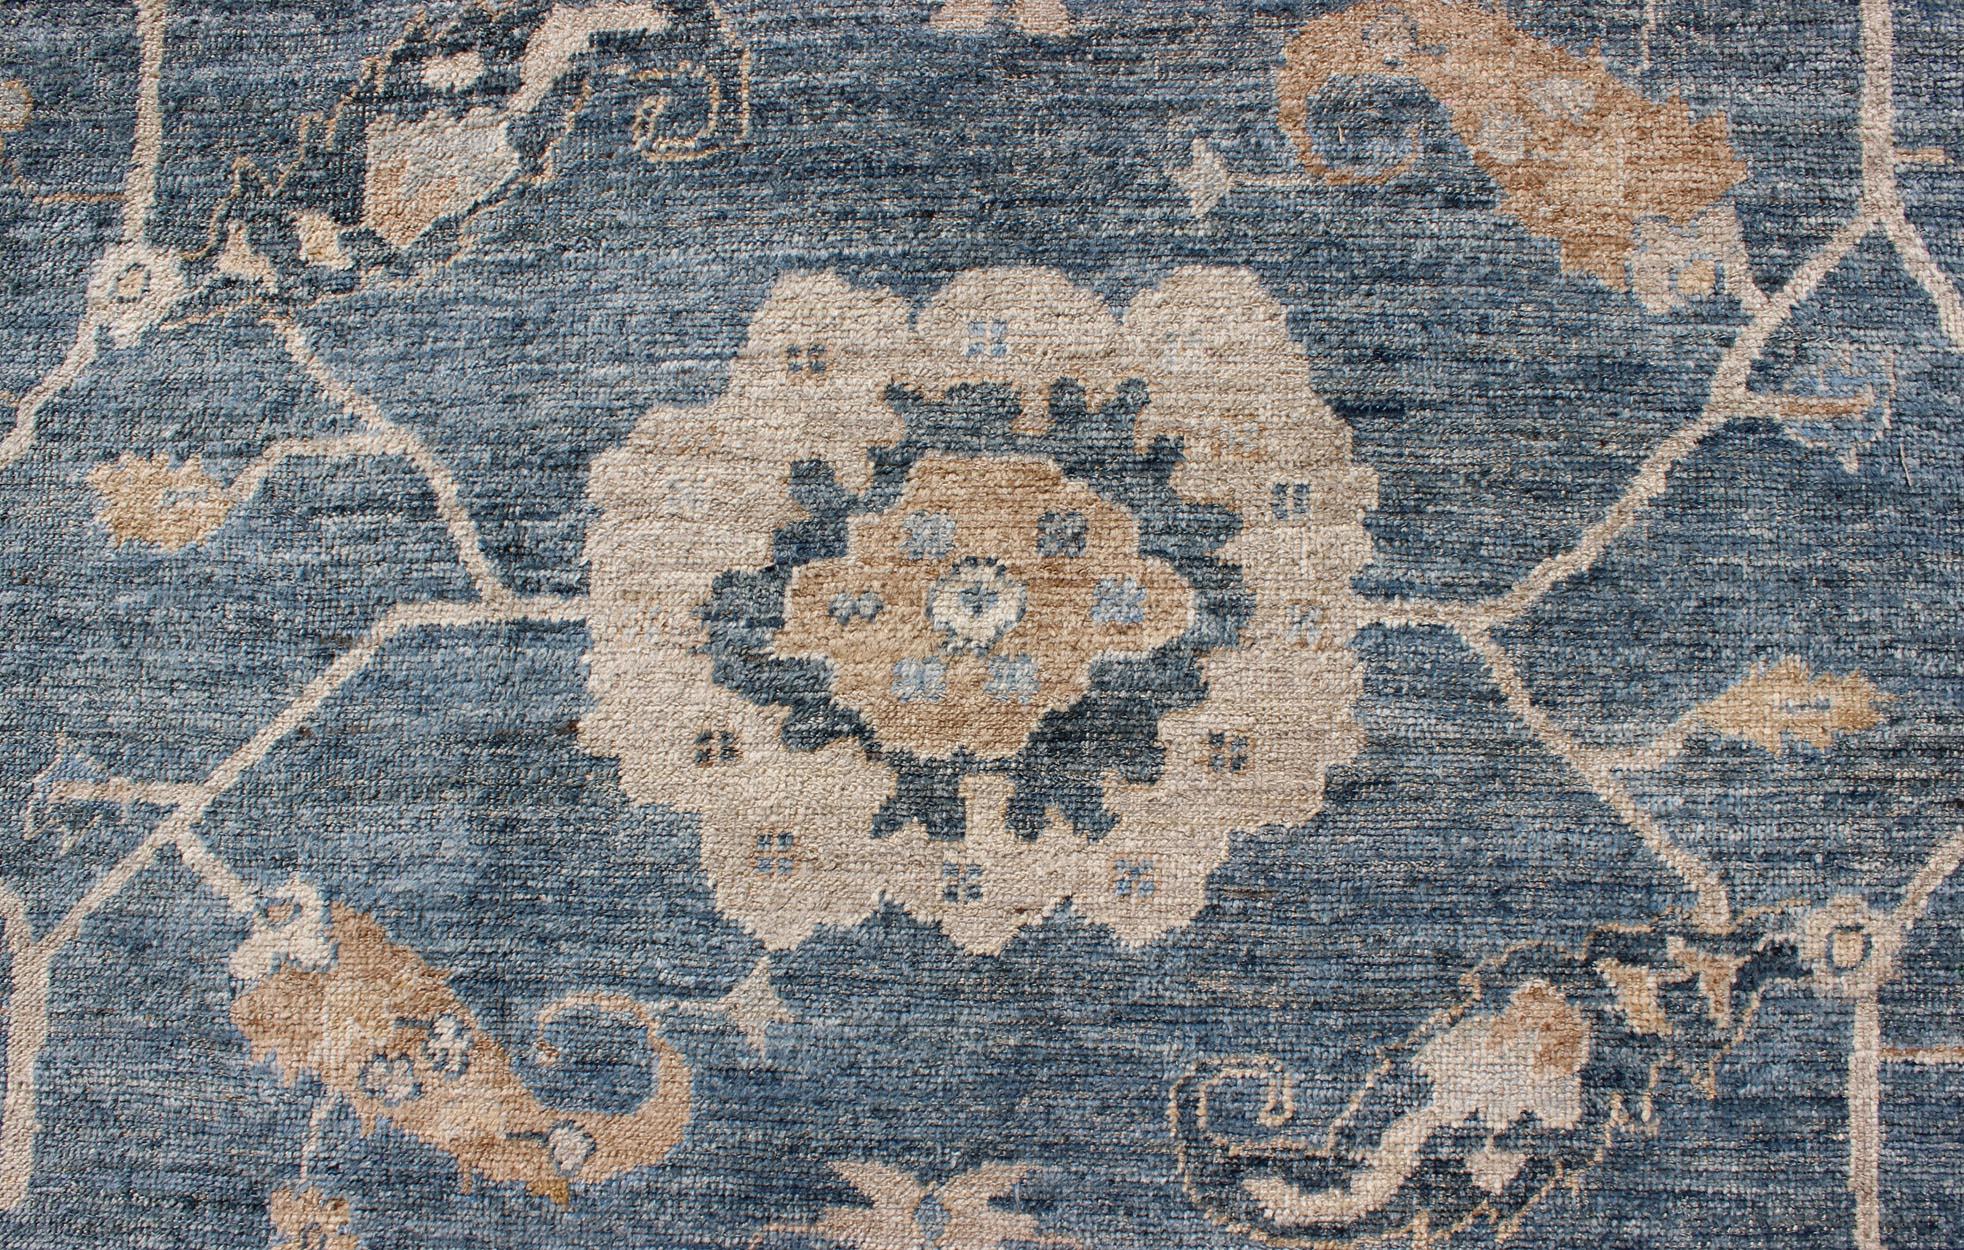 Wool Angora Turkish Oushak Rug in Shades of Blue and Tan